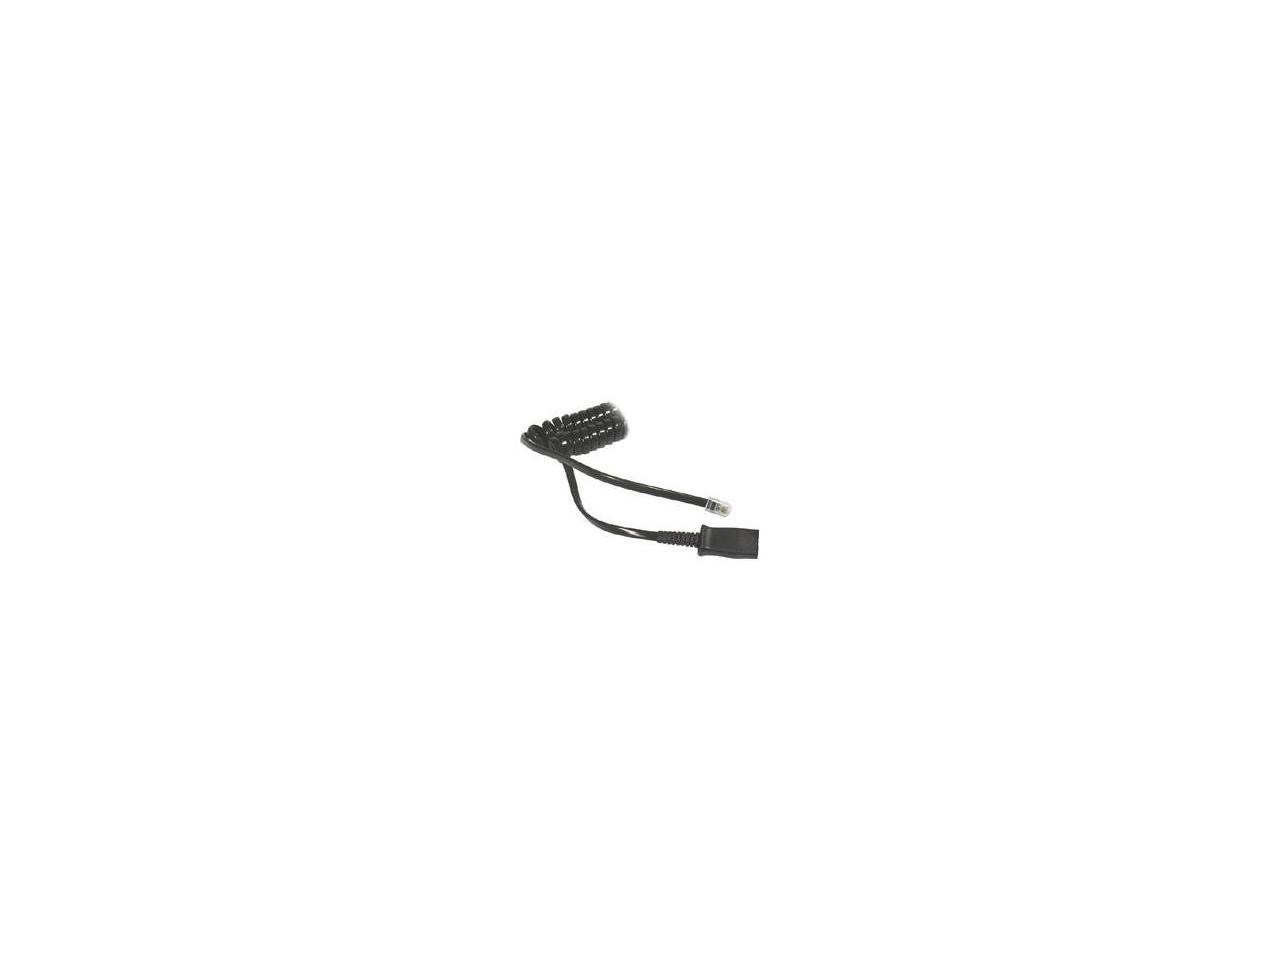 Plantronics U10 Headset Replacement Cable (26716-01 )